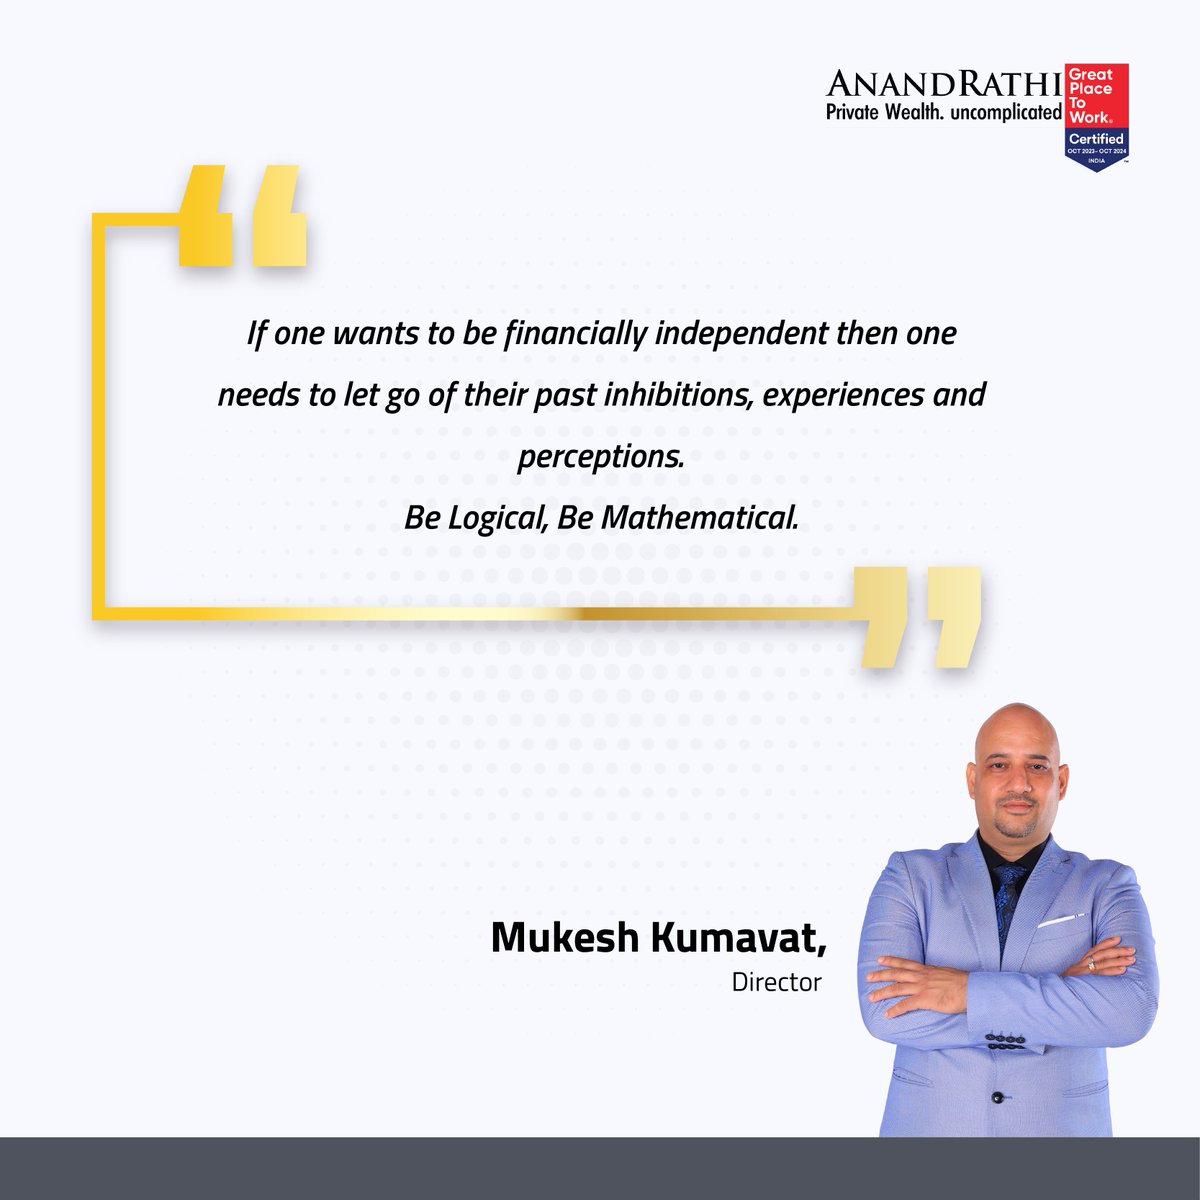 Our Director, @MukeshKumawa8, underscores the importance of a mindset shift as key to achieving financial independence and emphasizes the need to be logic and mathematical in their approach to investments. Know more: anandrathiwealth.in/landing #mathematicalrevolution…